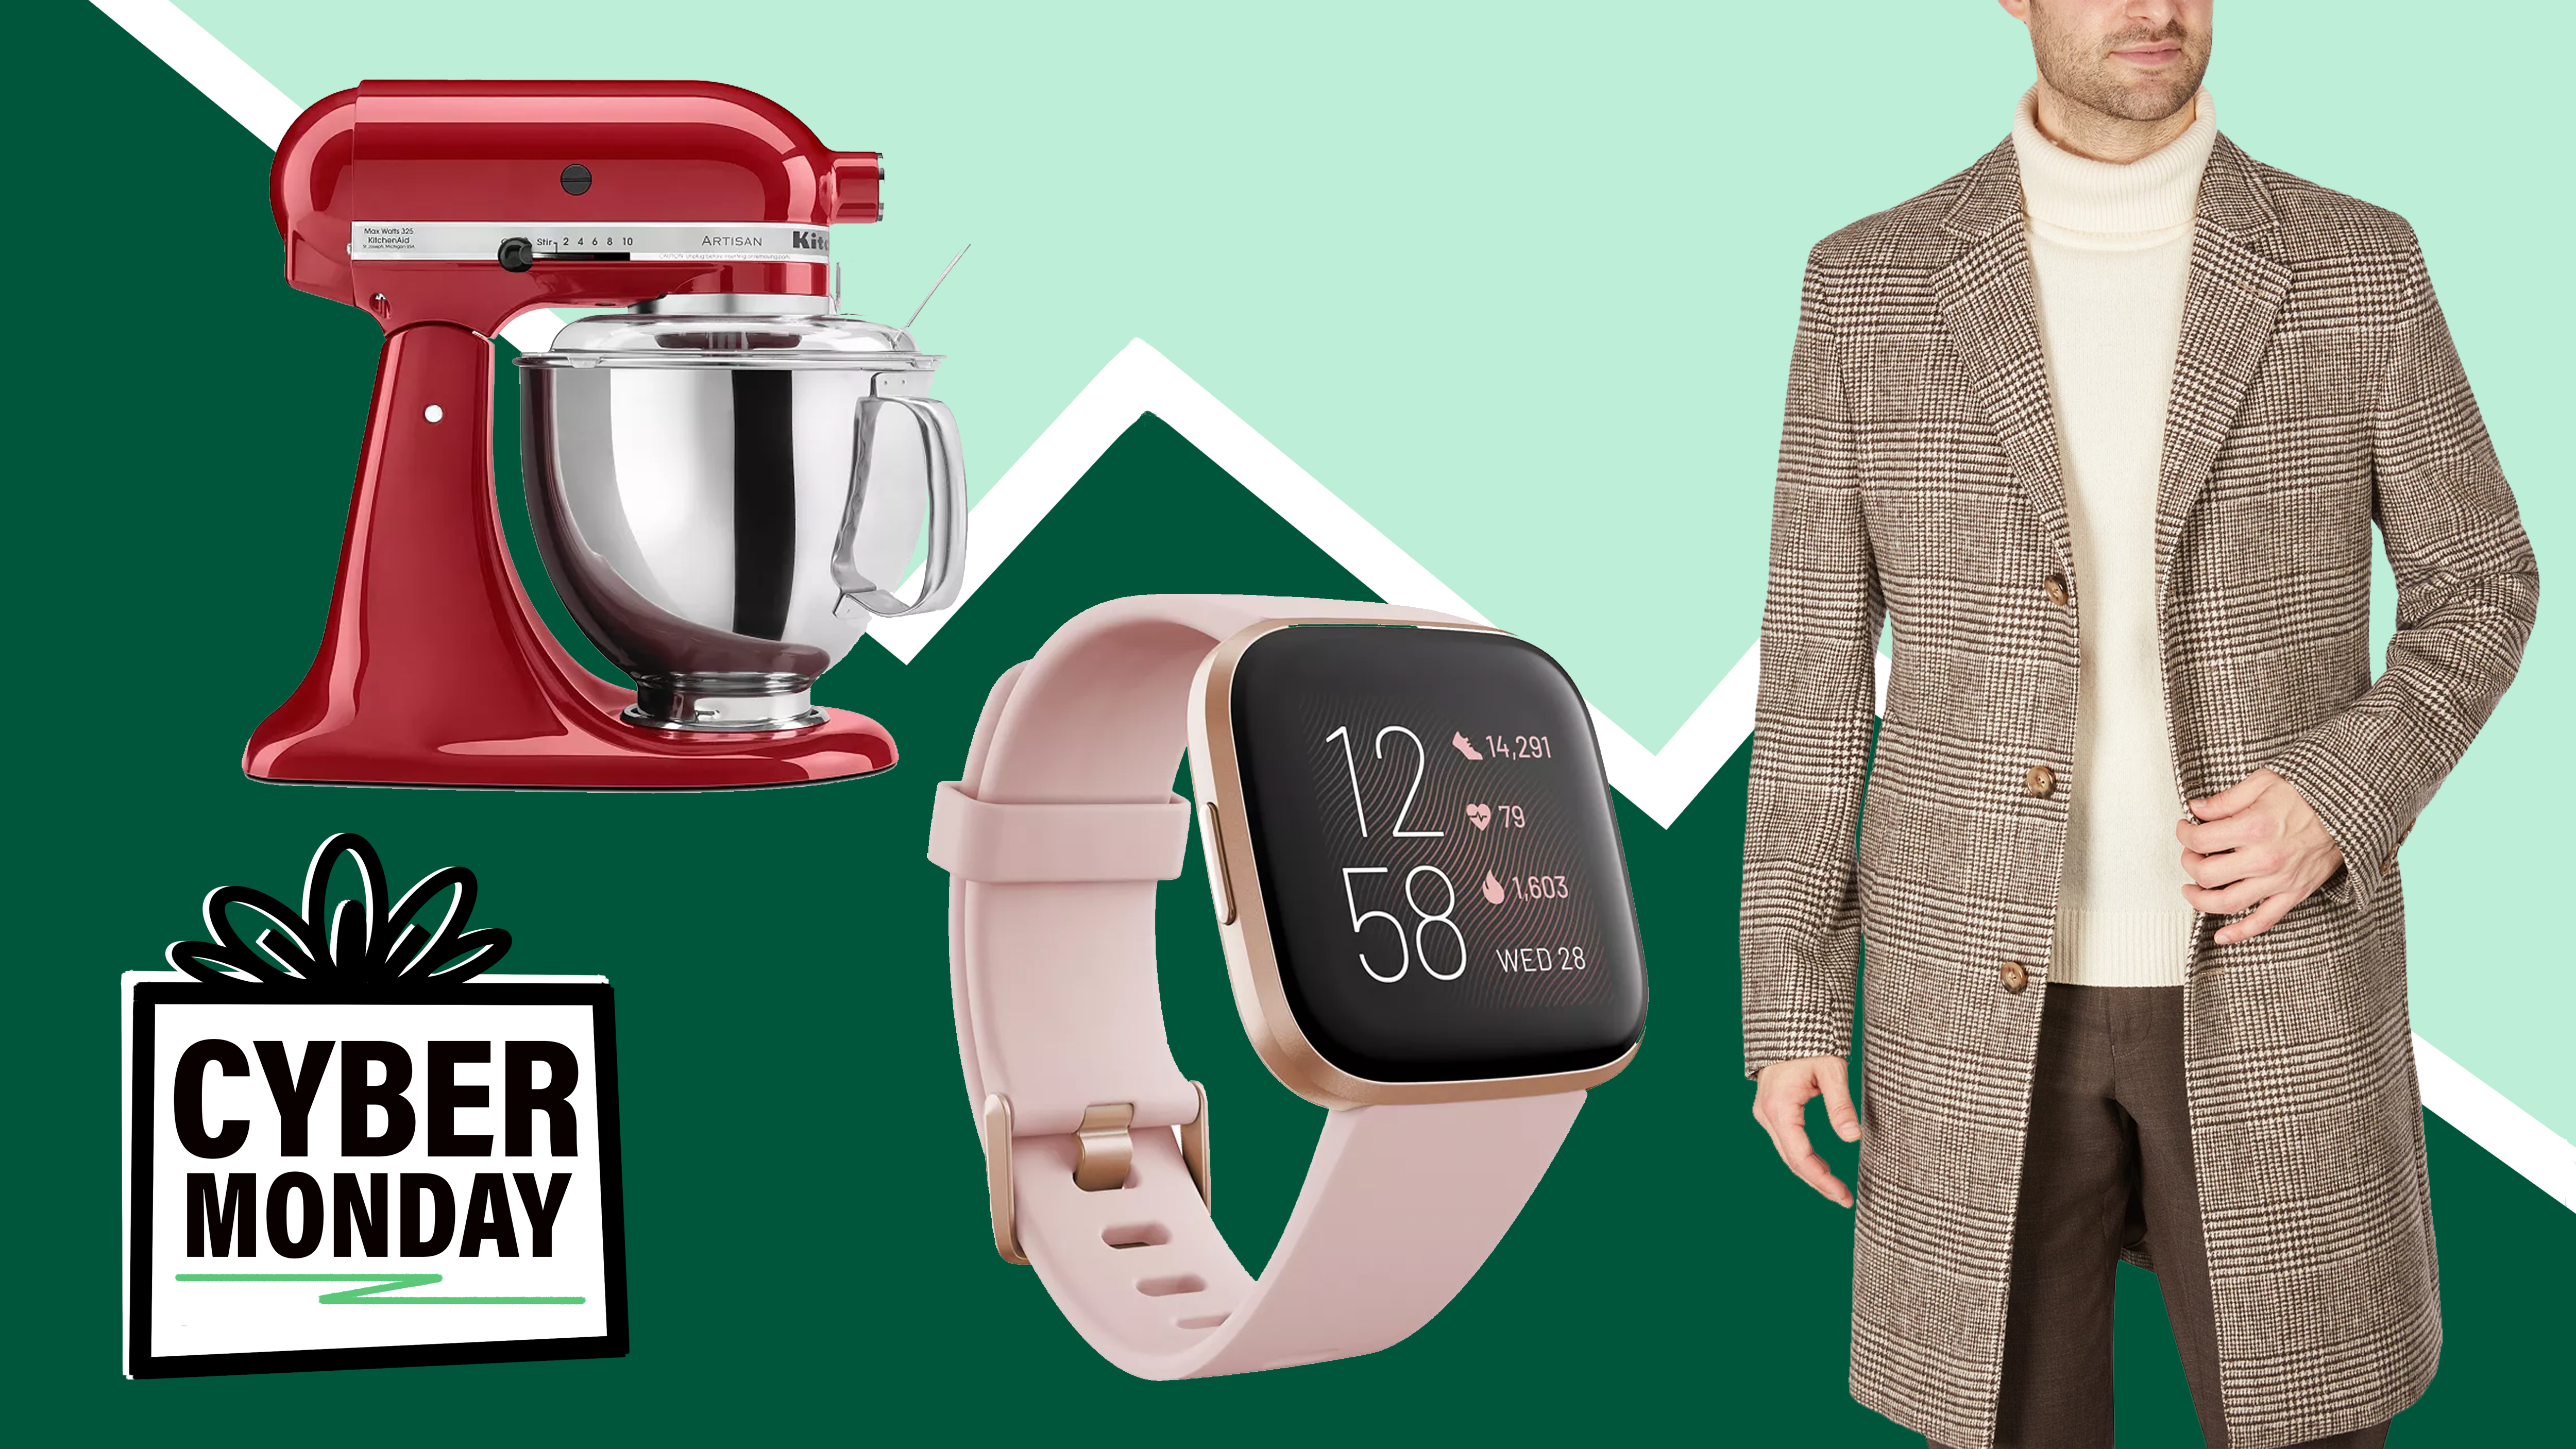 Macy's Cyber Monday 2021 savings start now: Shop massive discounts on KitchenAid, Shark and more